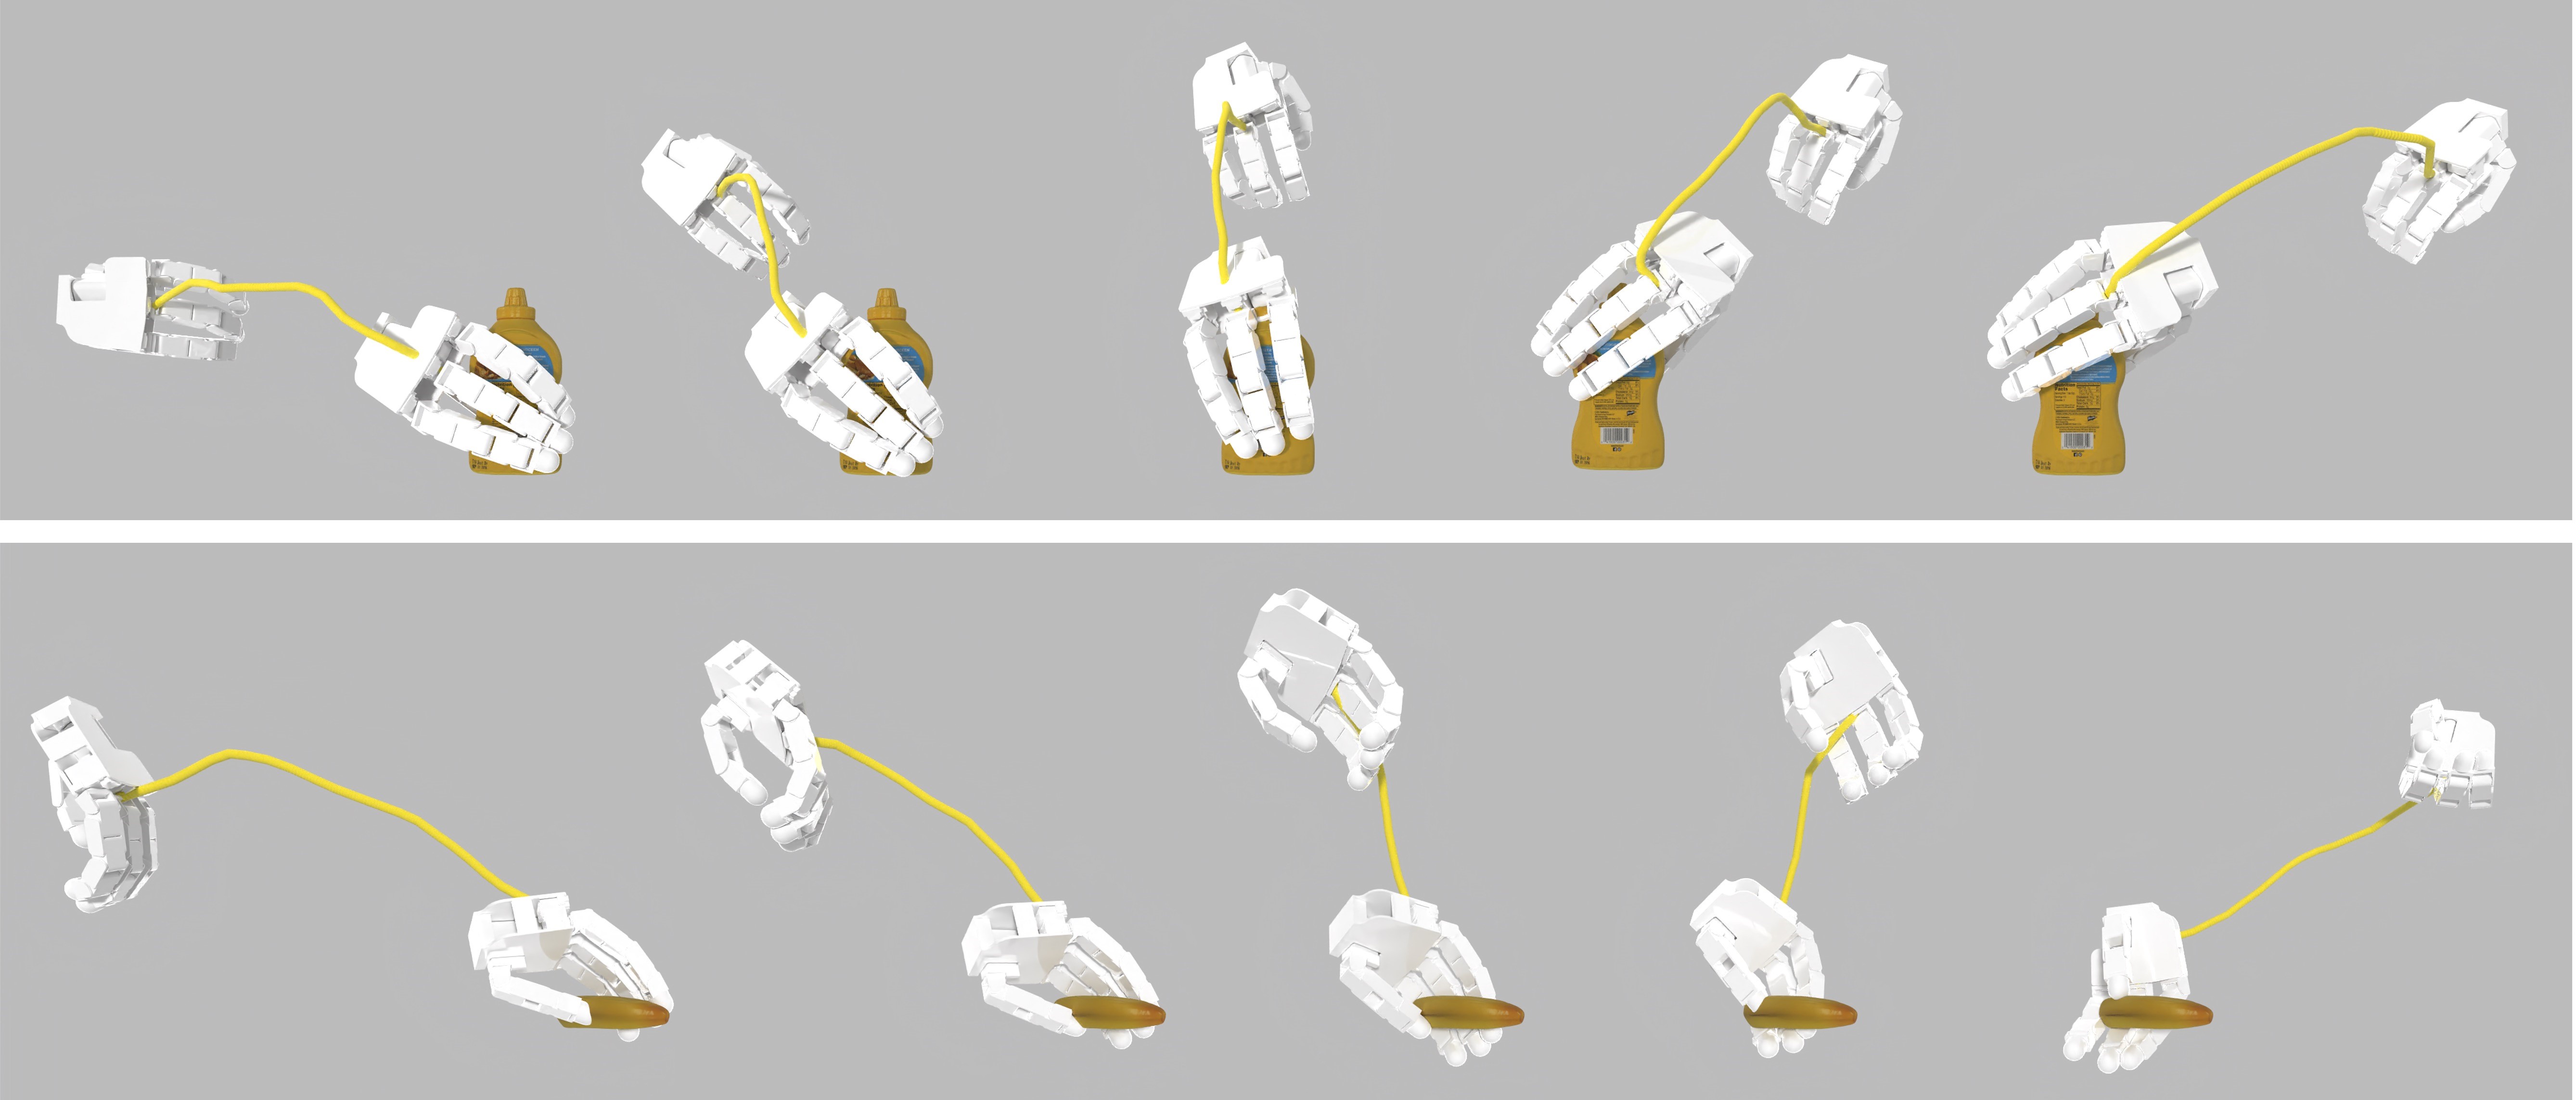 Learning Continuous Grasping Function With a Dexterous Hand From Human Demonstrations